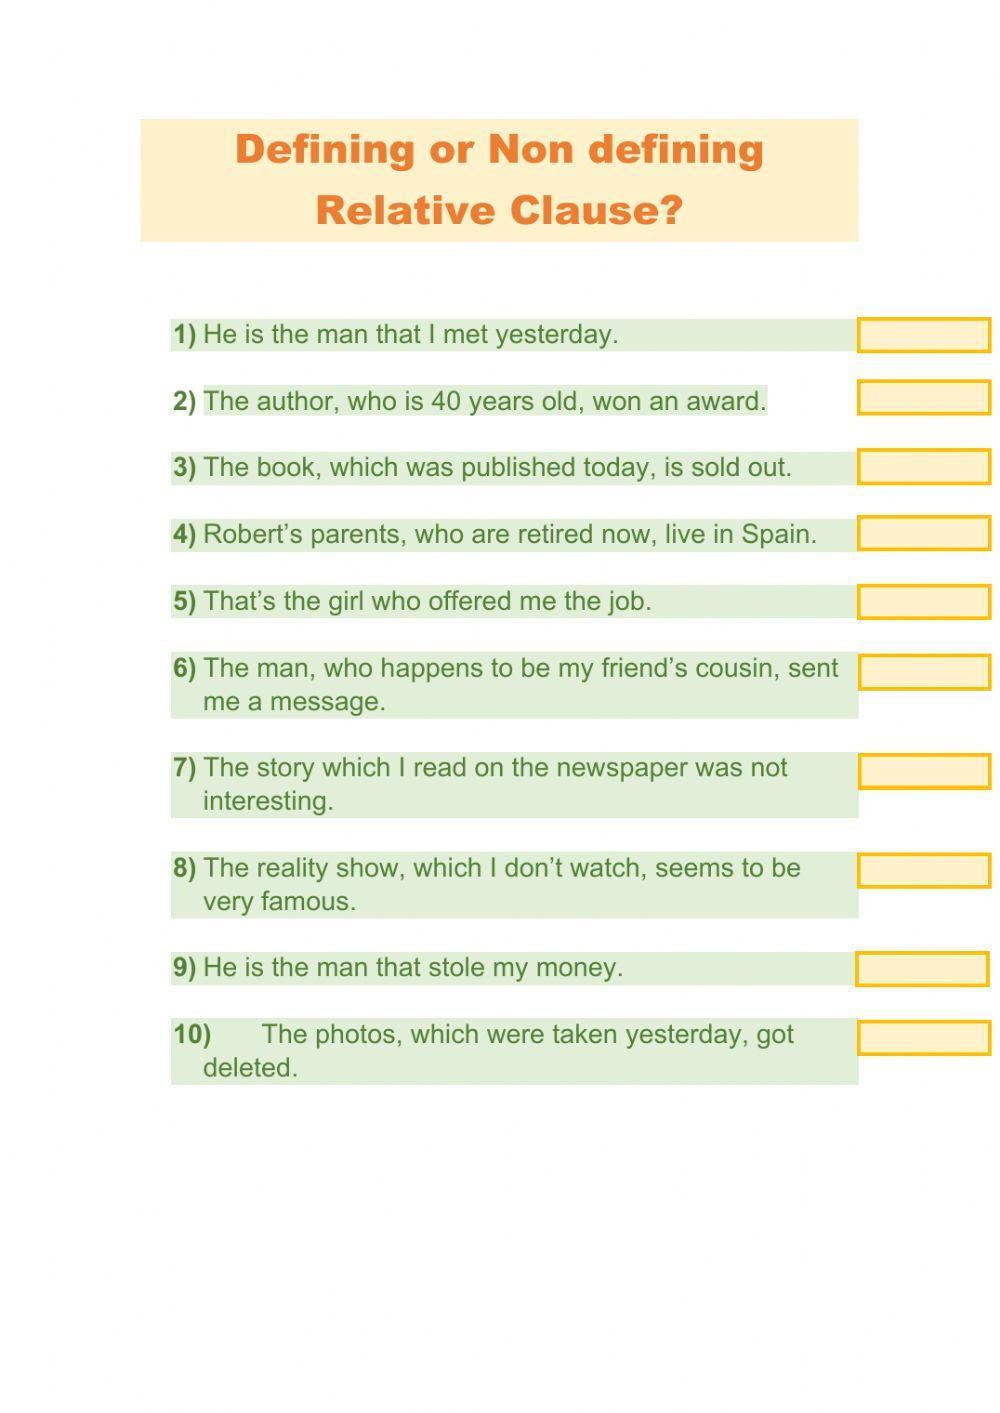 Defining vs Non defining Relative Clause